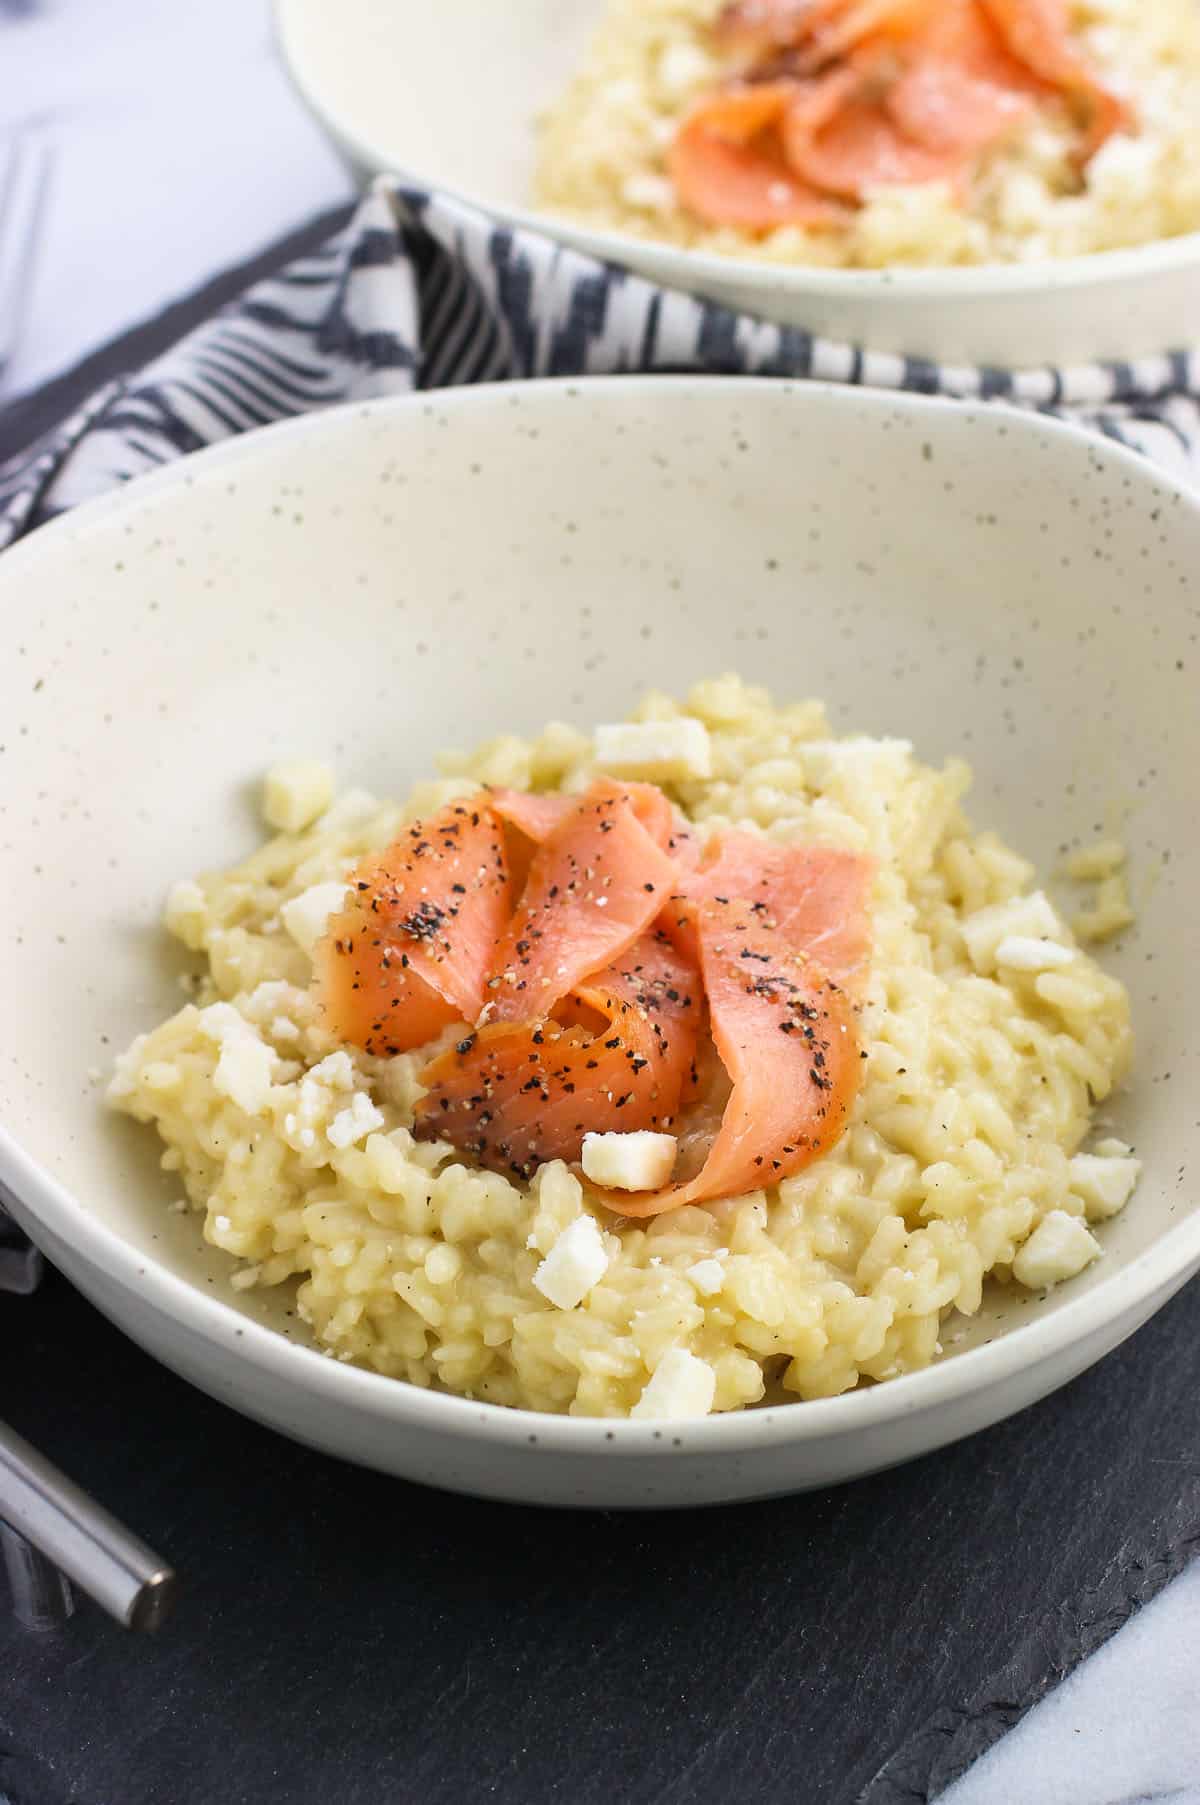 A shallow bowl of risotto topped with smoked salmon slices.